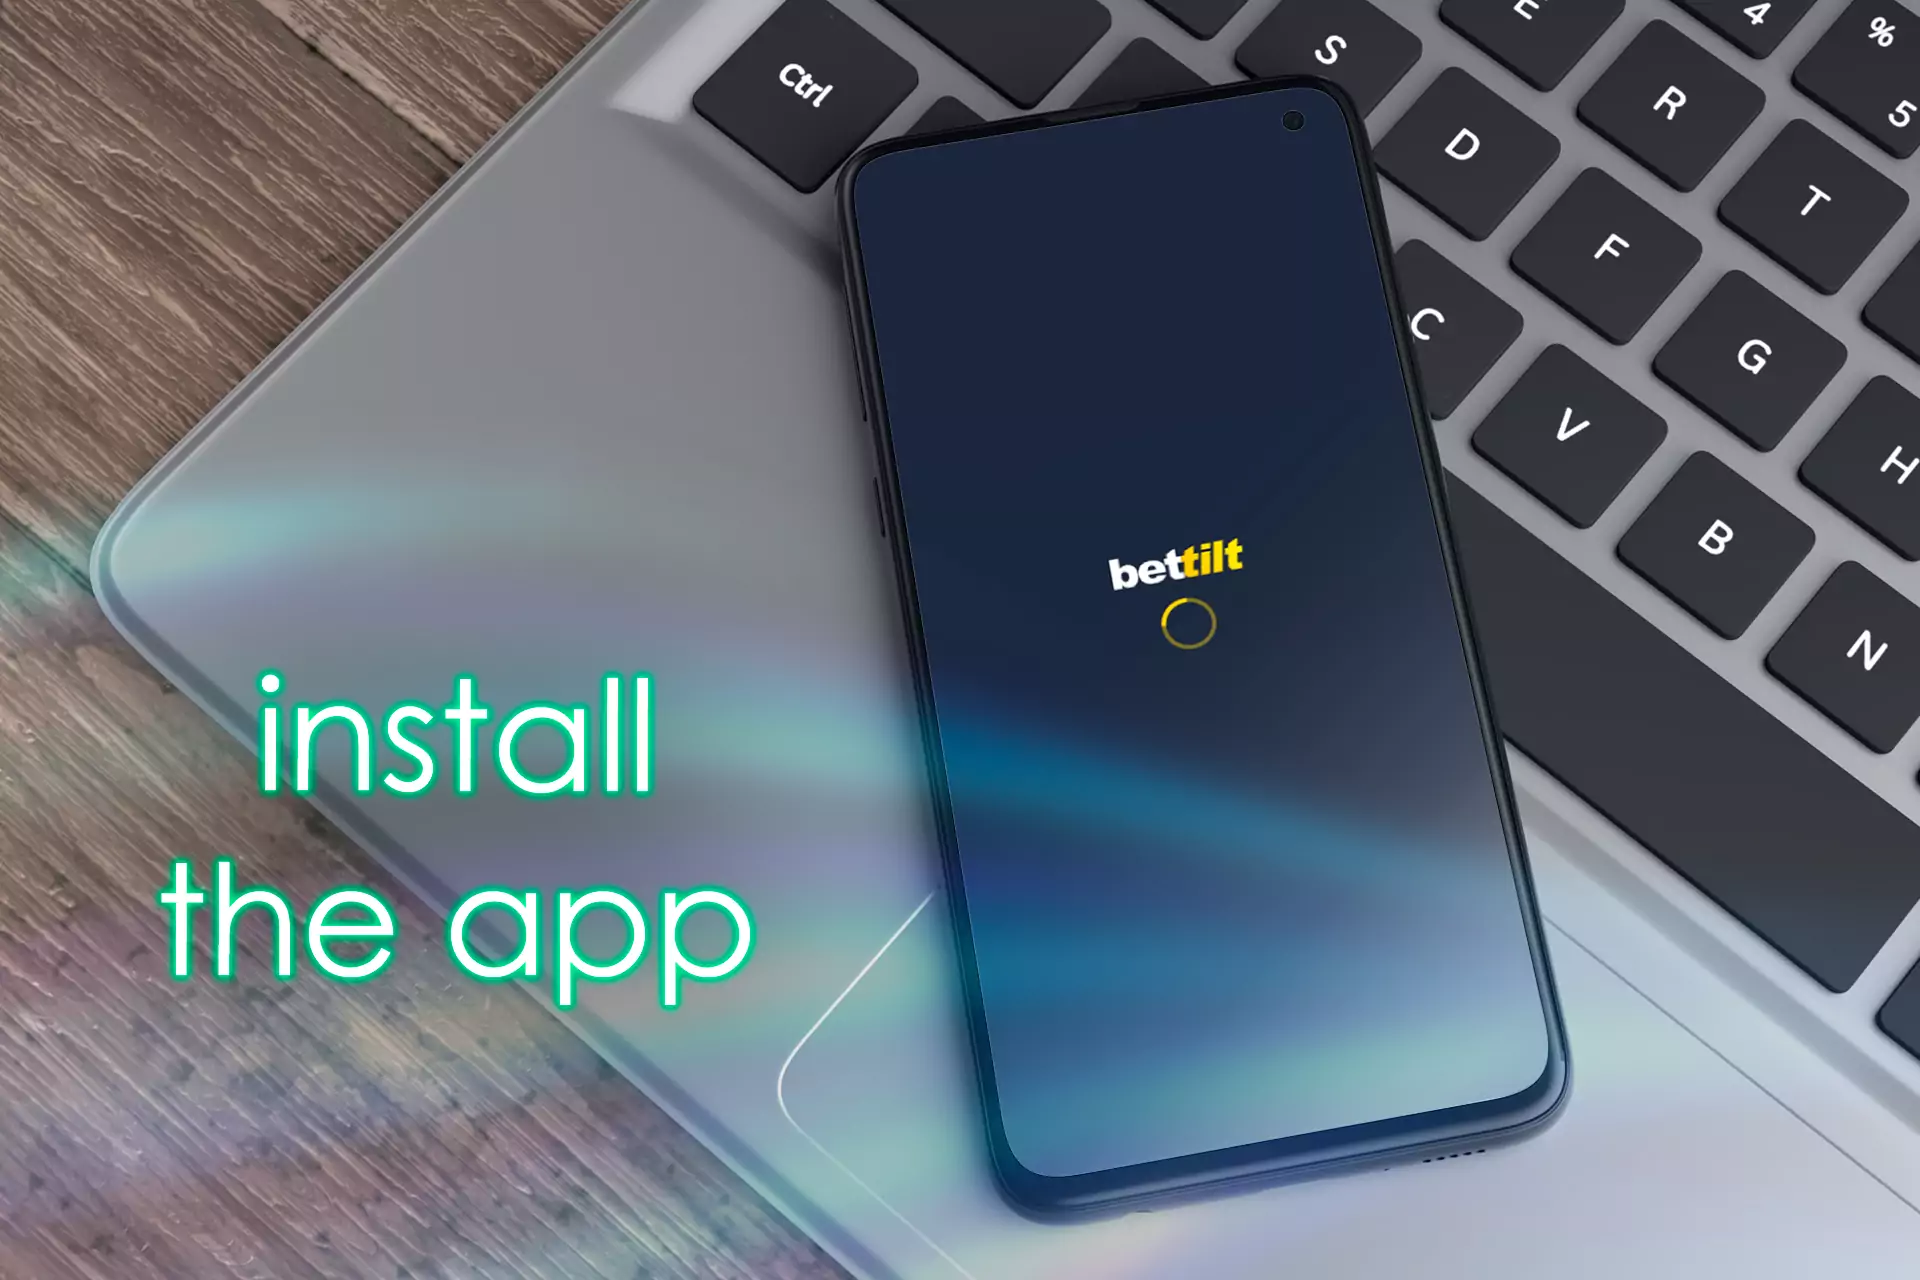 Run the apk file you have just downloaded and install the app.